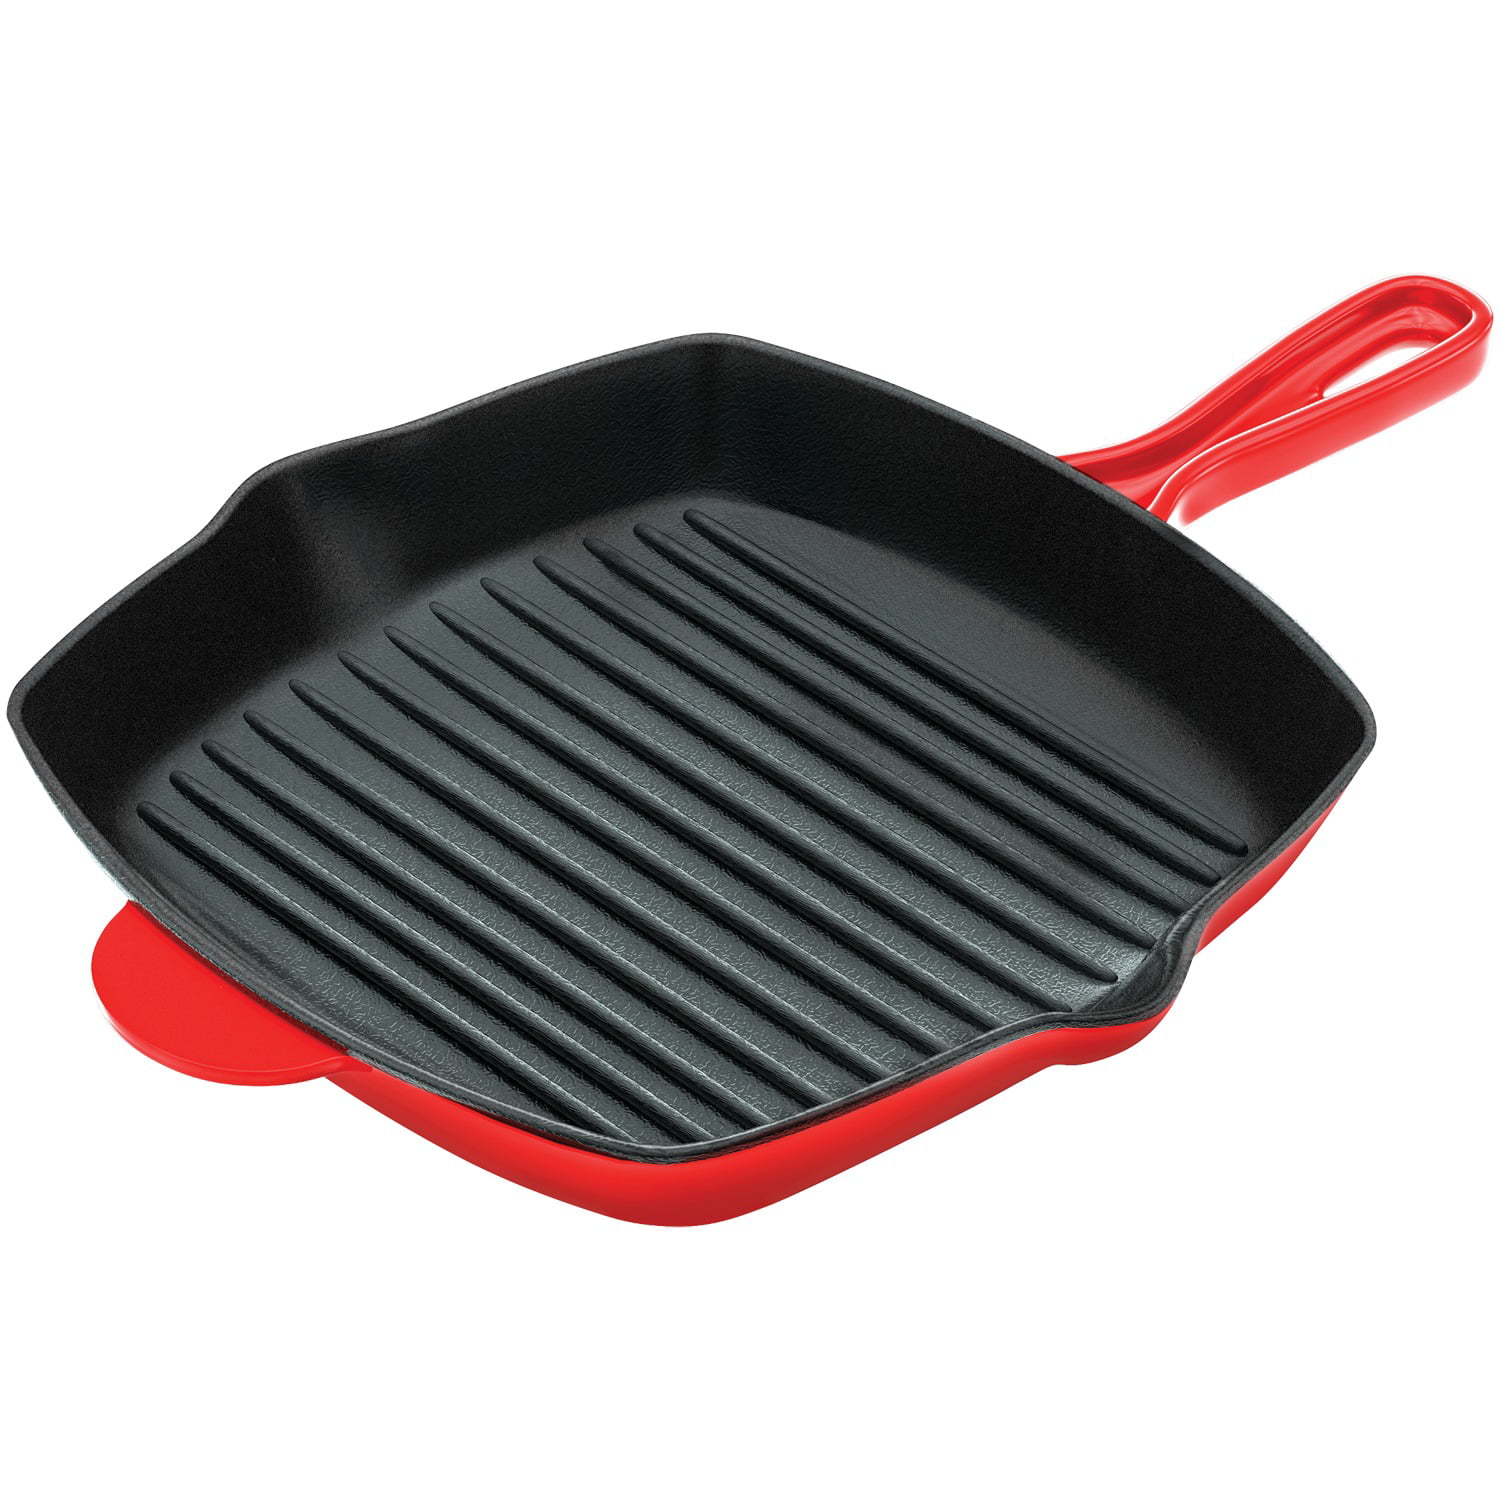 Maifanstone Non-Stick Frying BBQ Griddle Plate Cooking Skillet Grill Pan Square 